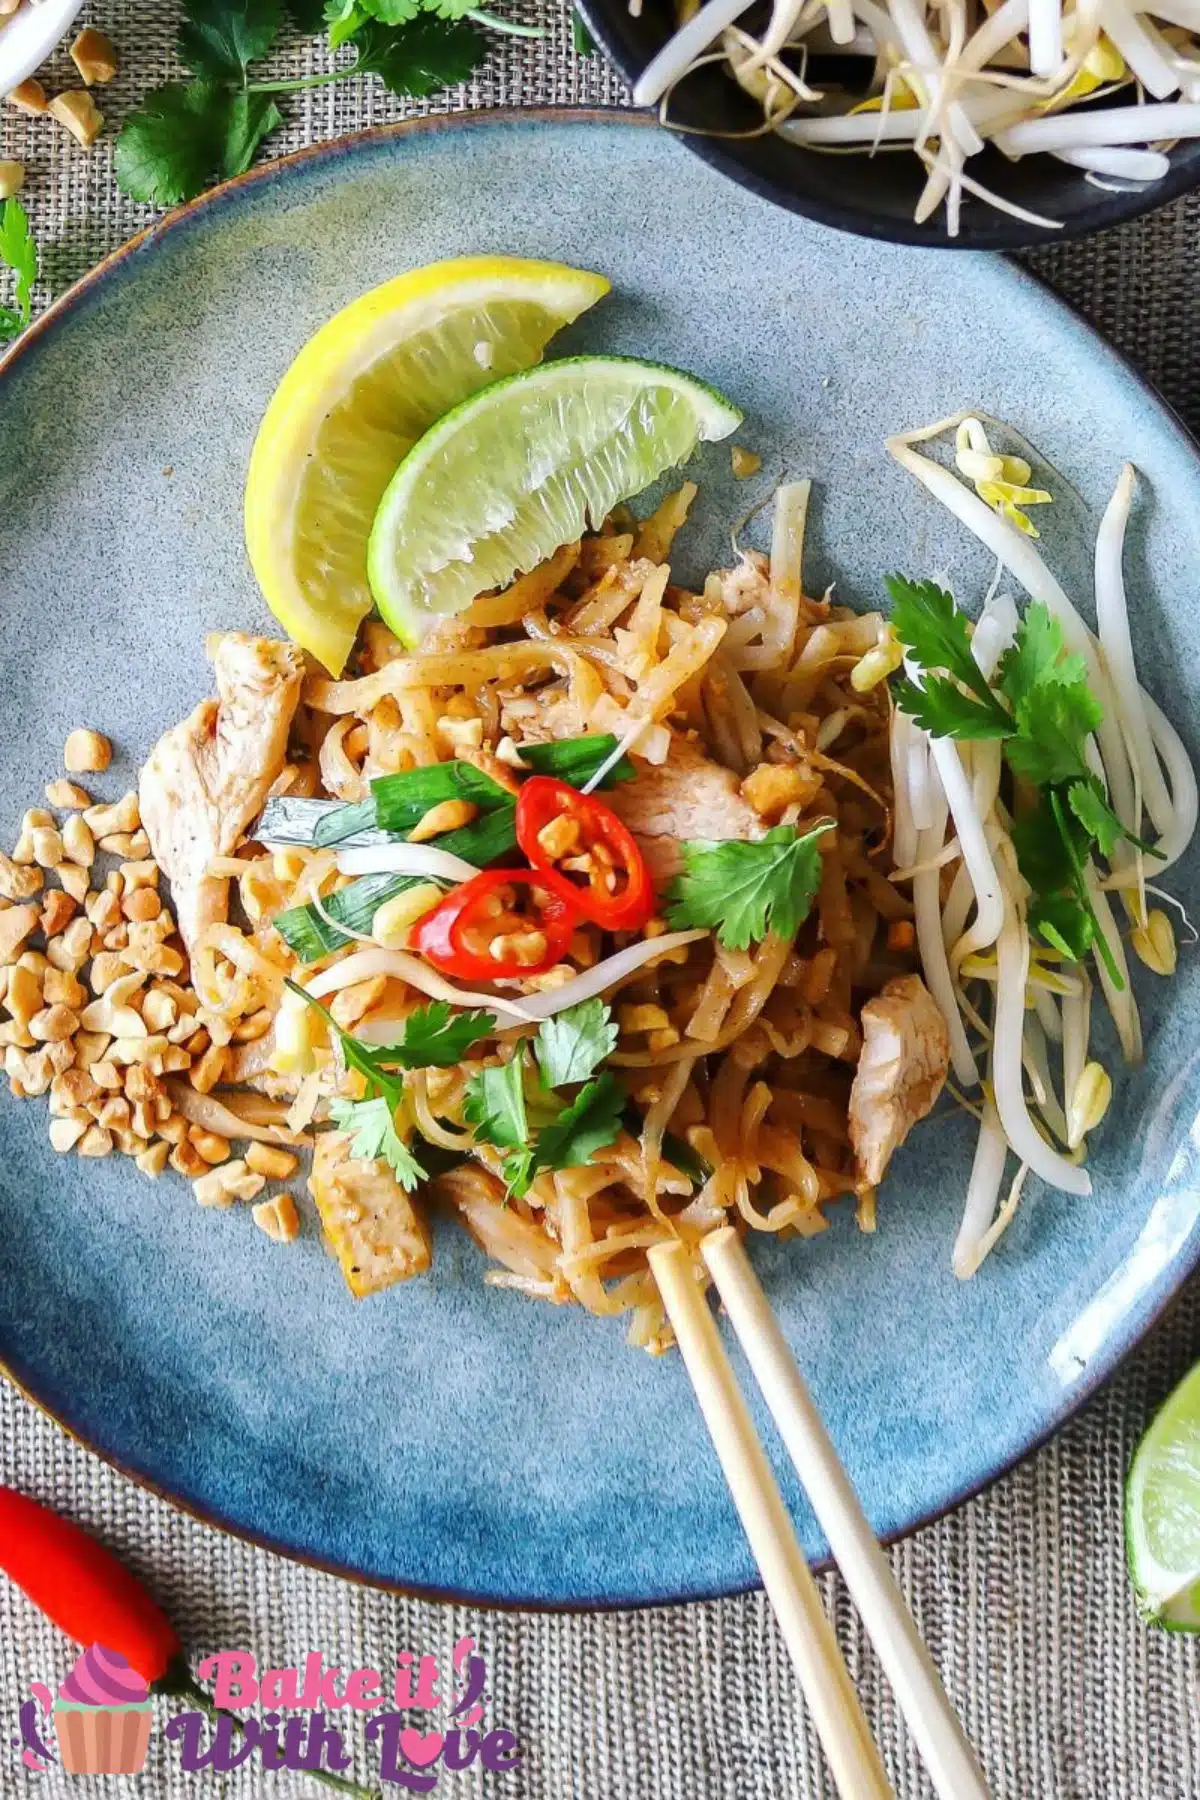 Tall image of pad thai on a blue plate.